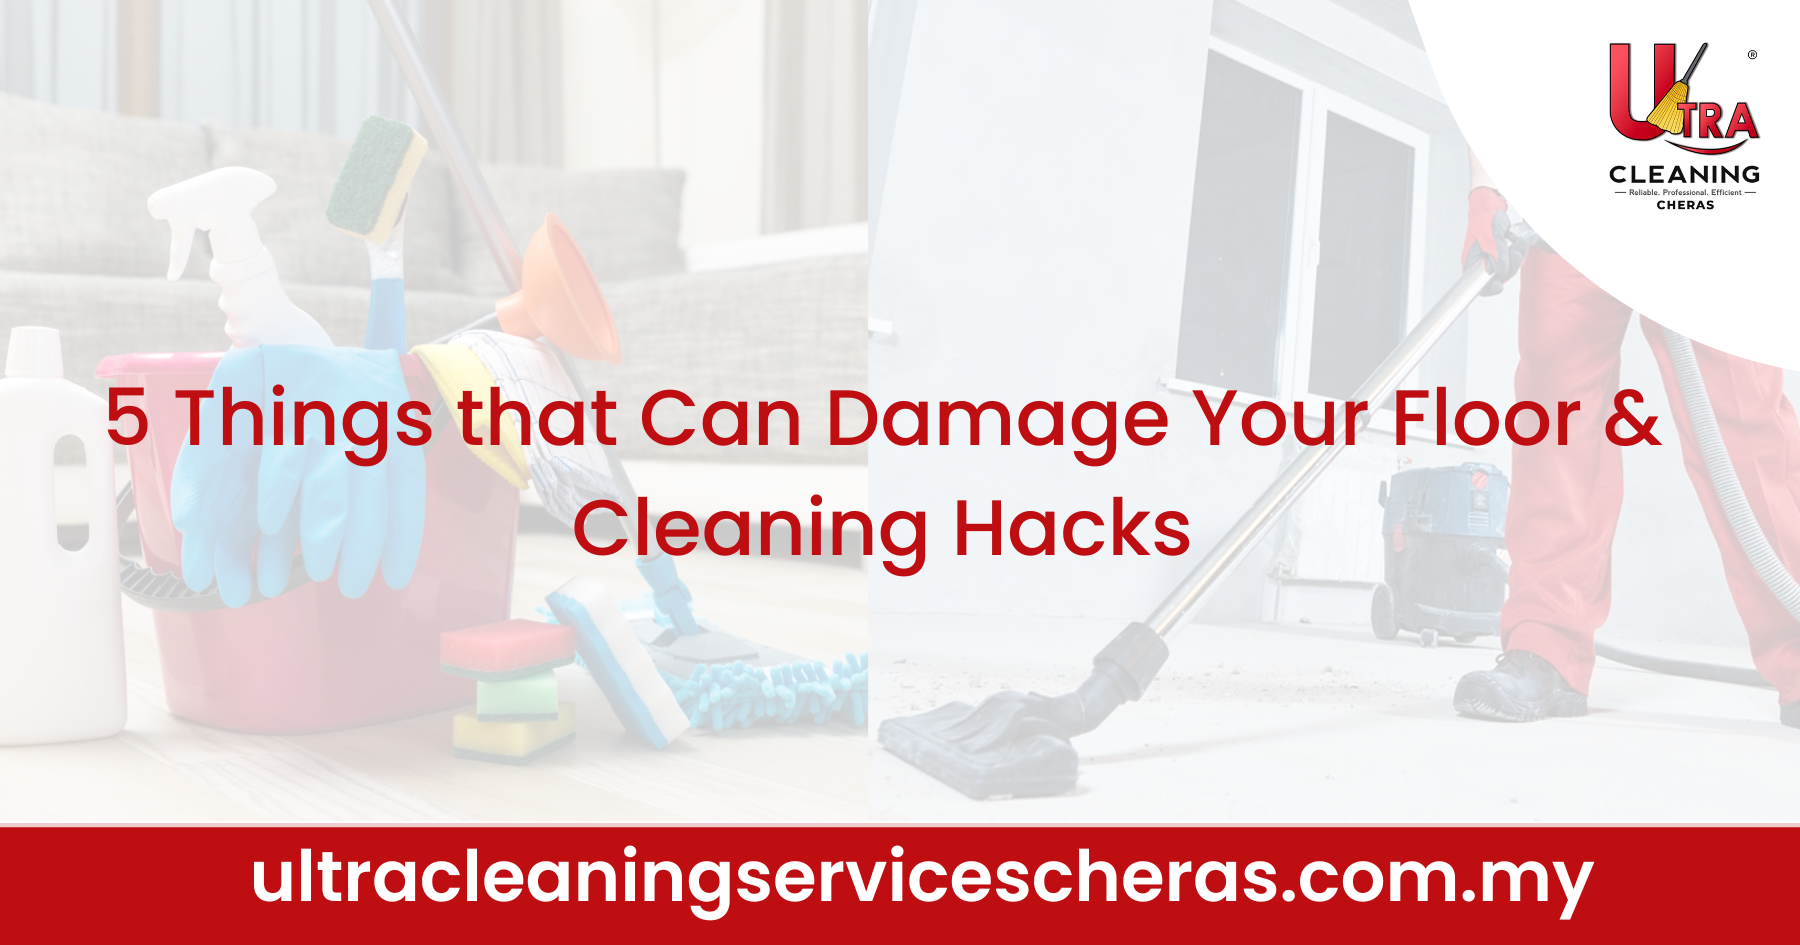 5 Things that Can Damage Your Floor & Cleaning Hacks